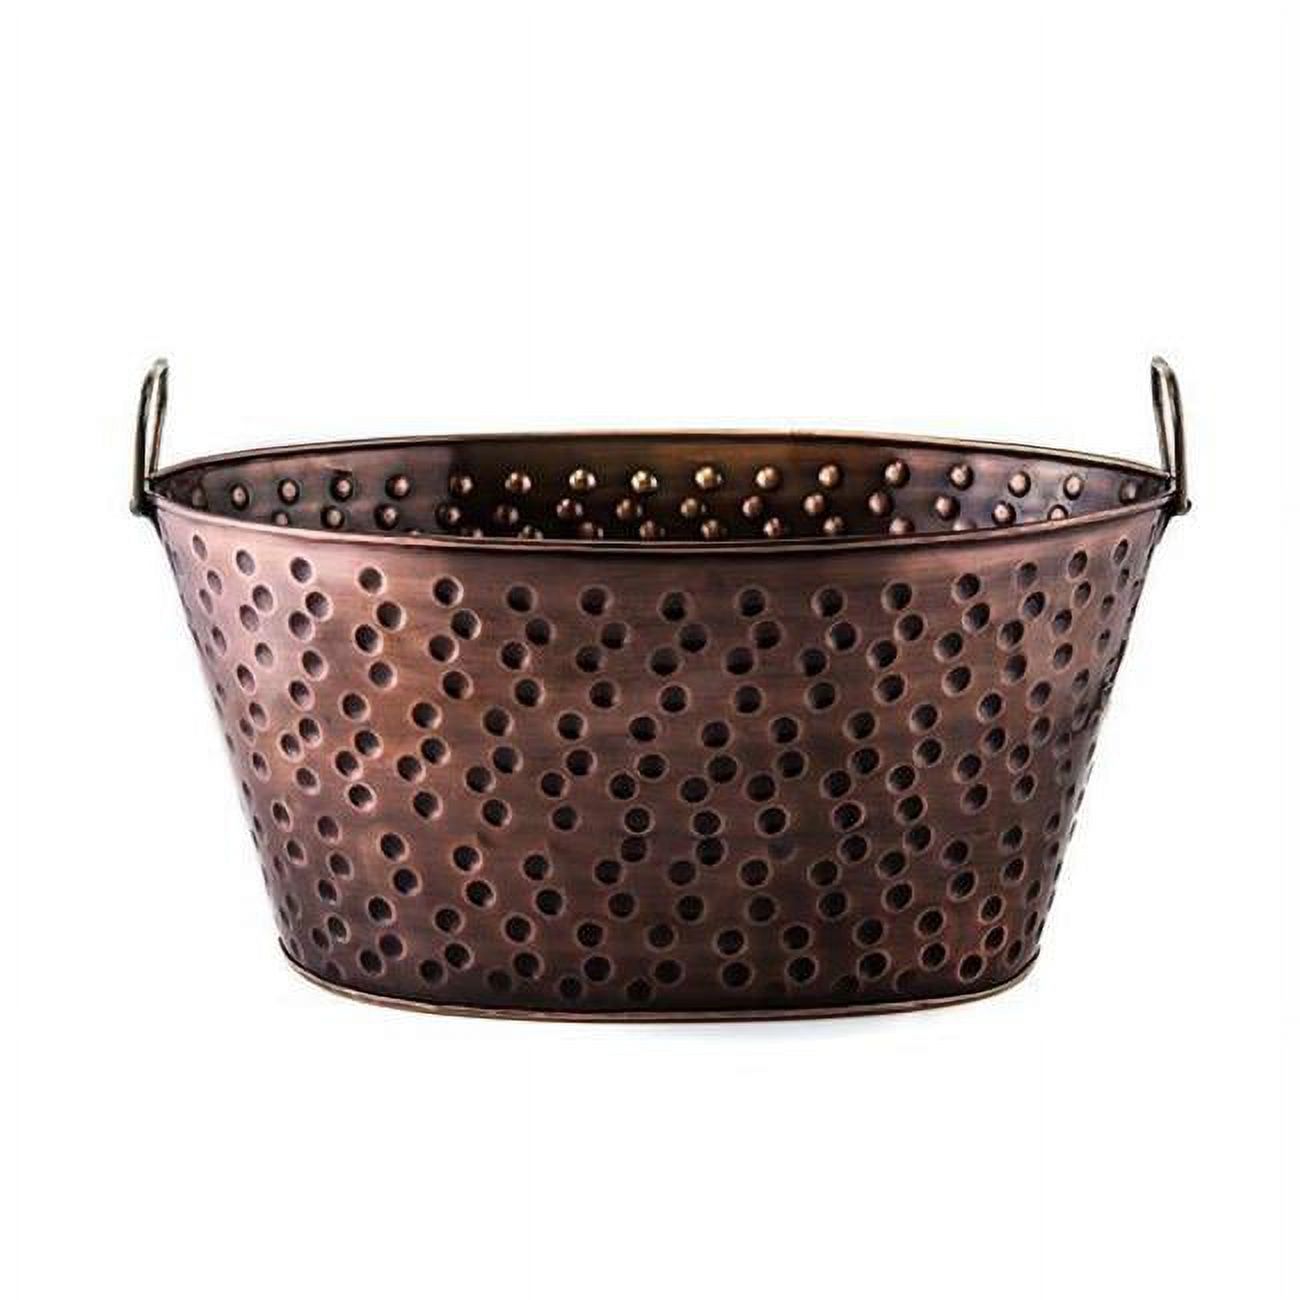 Old Dutch International  16.25 x 12 x8.25 Oval Antique Hammered Copper Party Tub 4 Gallons - image 1 of 2